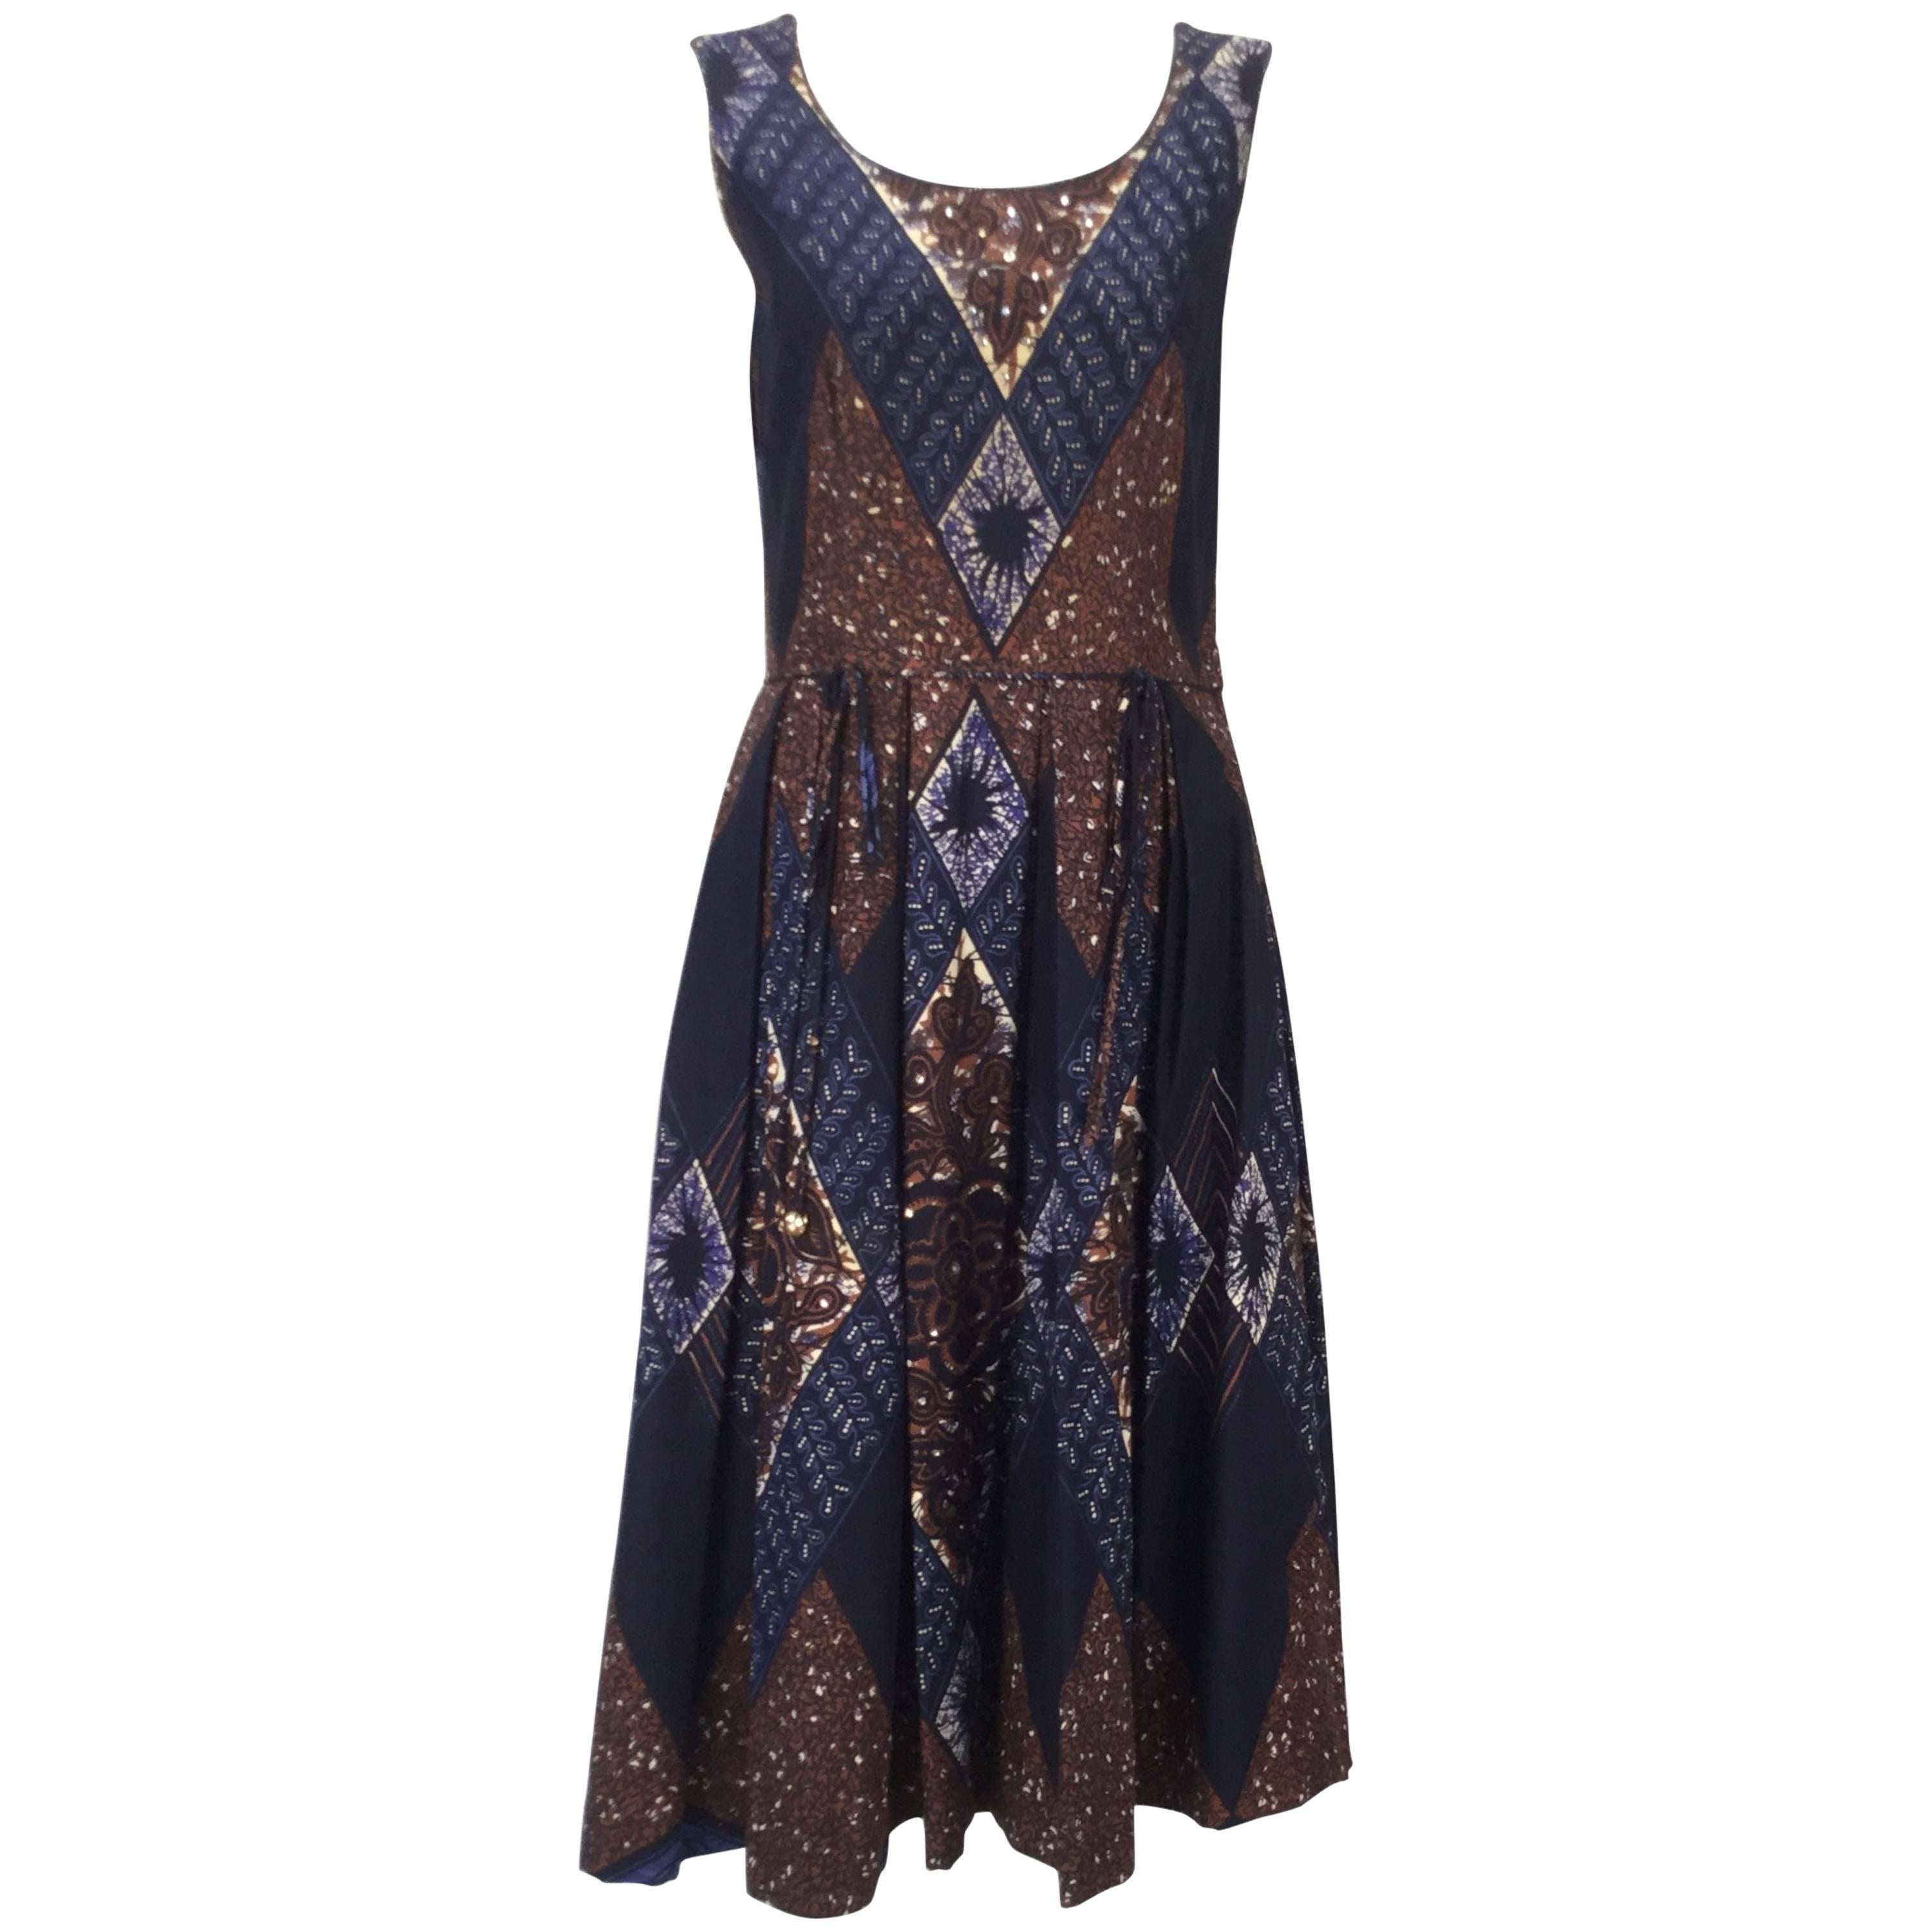 Ikat Blue and Brown Dress with Subtle Sequin Handwork, 1950s  For Sale